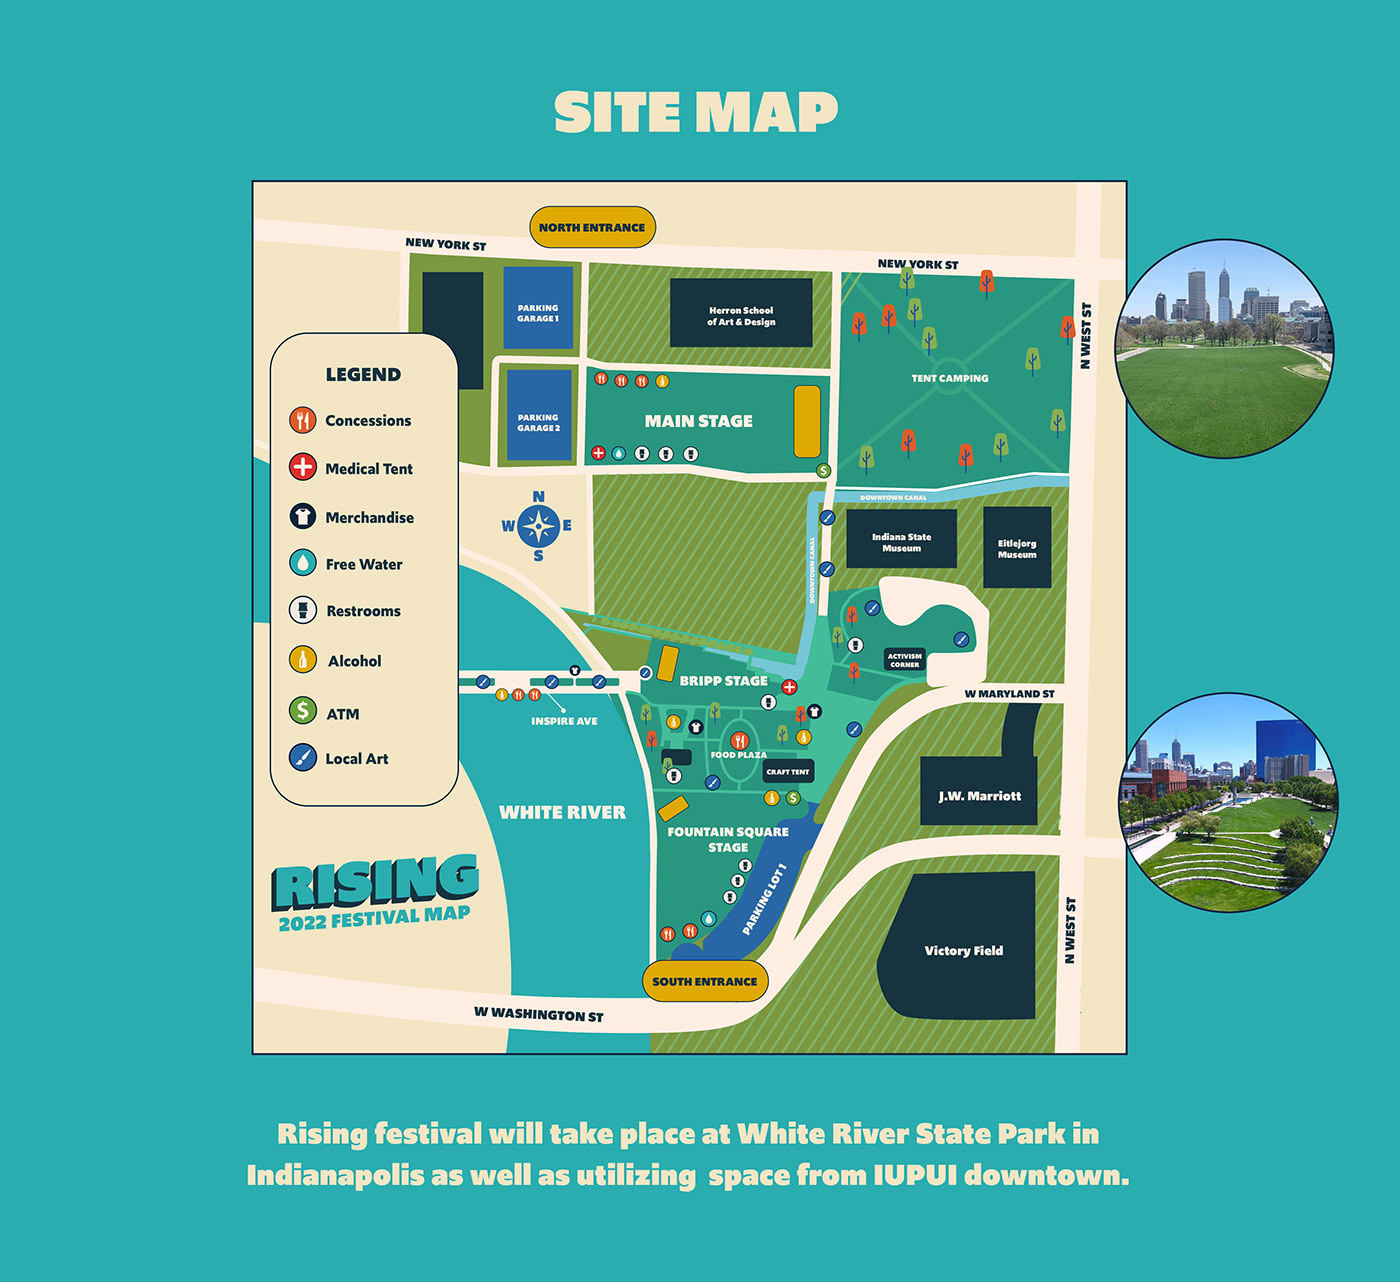 Site Map of Festival with legend and stages 